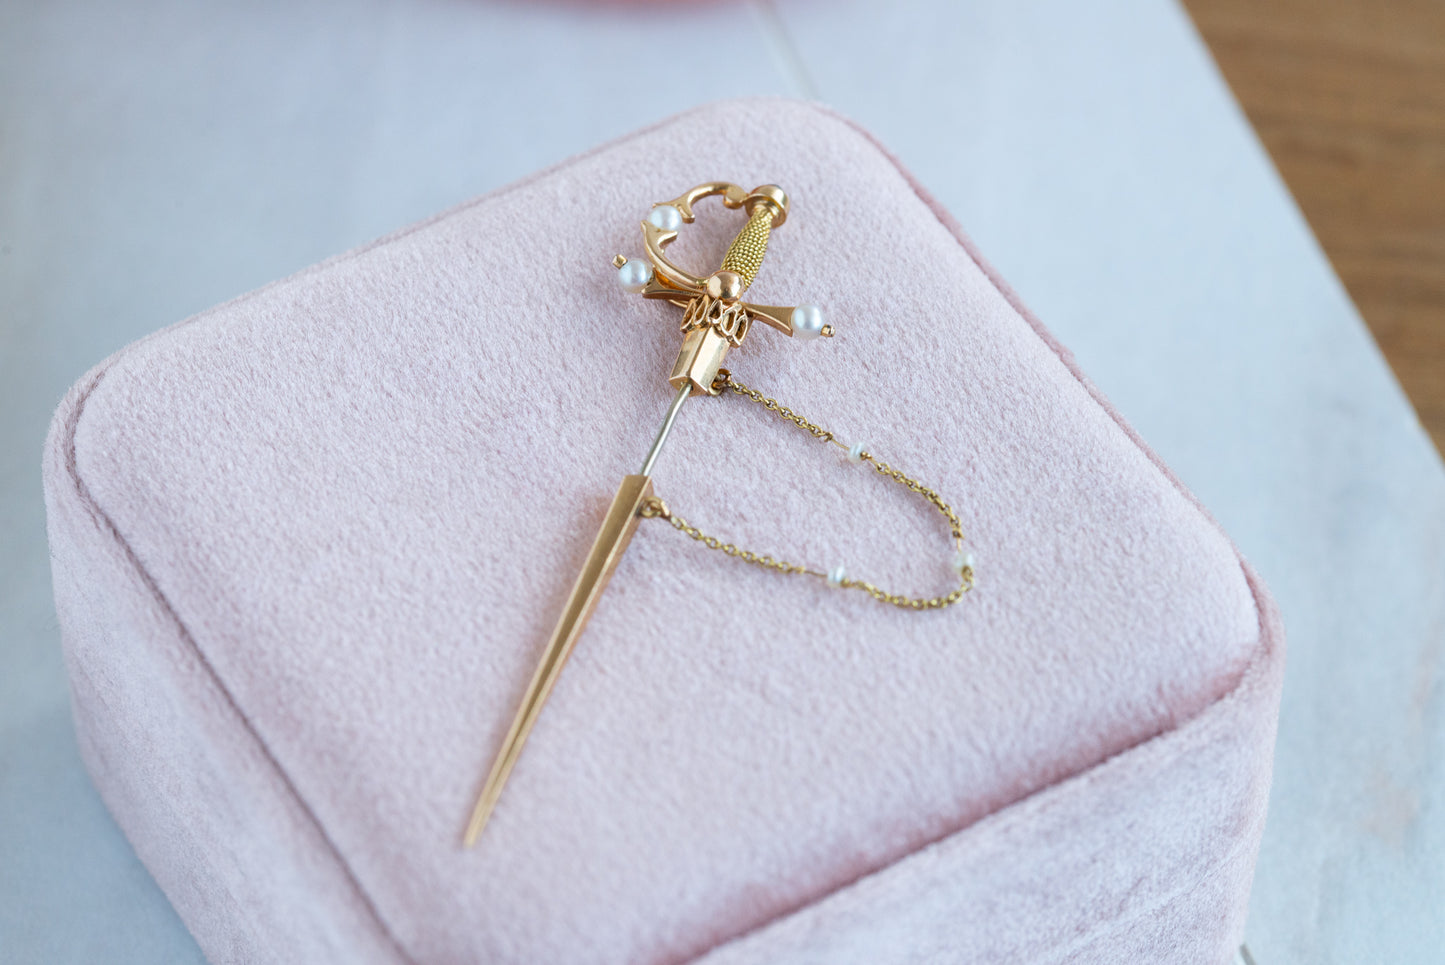 Premium High Carat Jabbot Sword Pin with Sapphire and Pearls